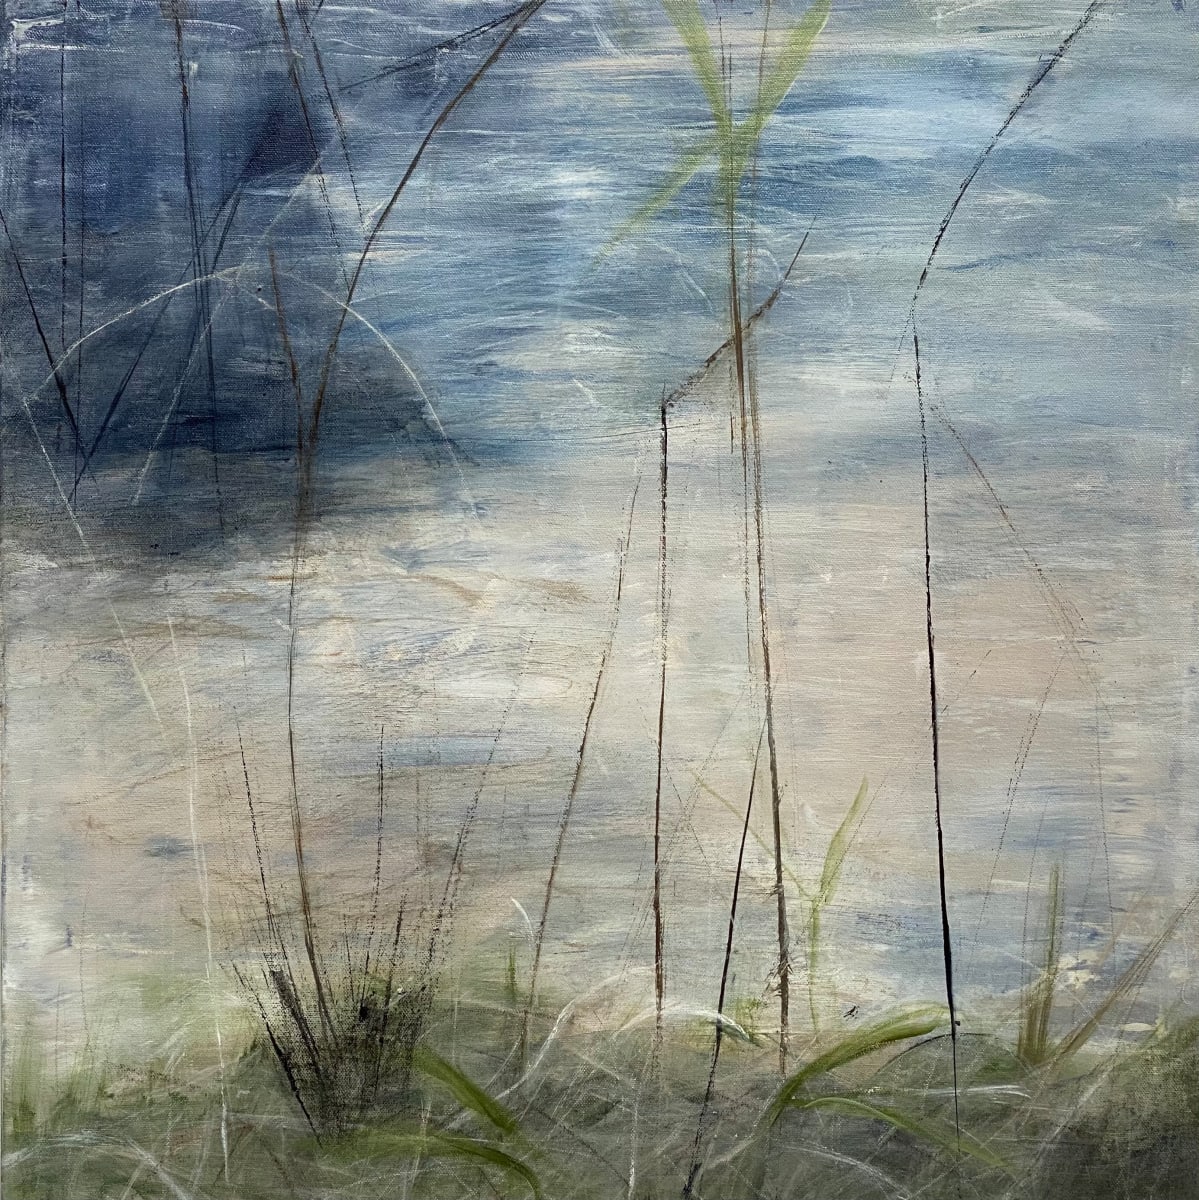 2195, Juanita Bellavance, Chestatee 7, From the Chestatee river portfolio, 2021, Acrylic on canvas, 24 x 24 inches 